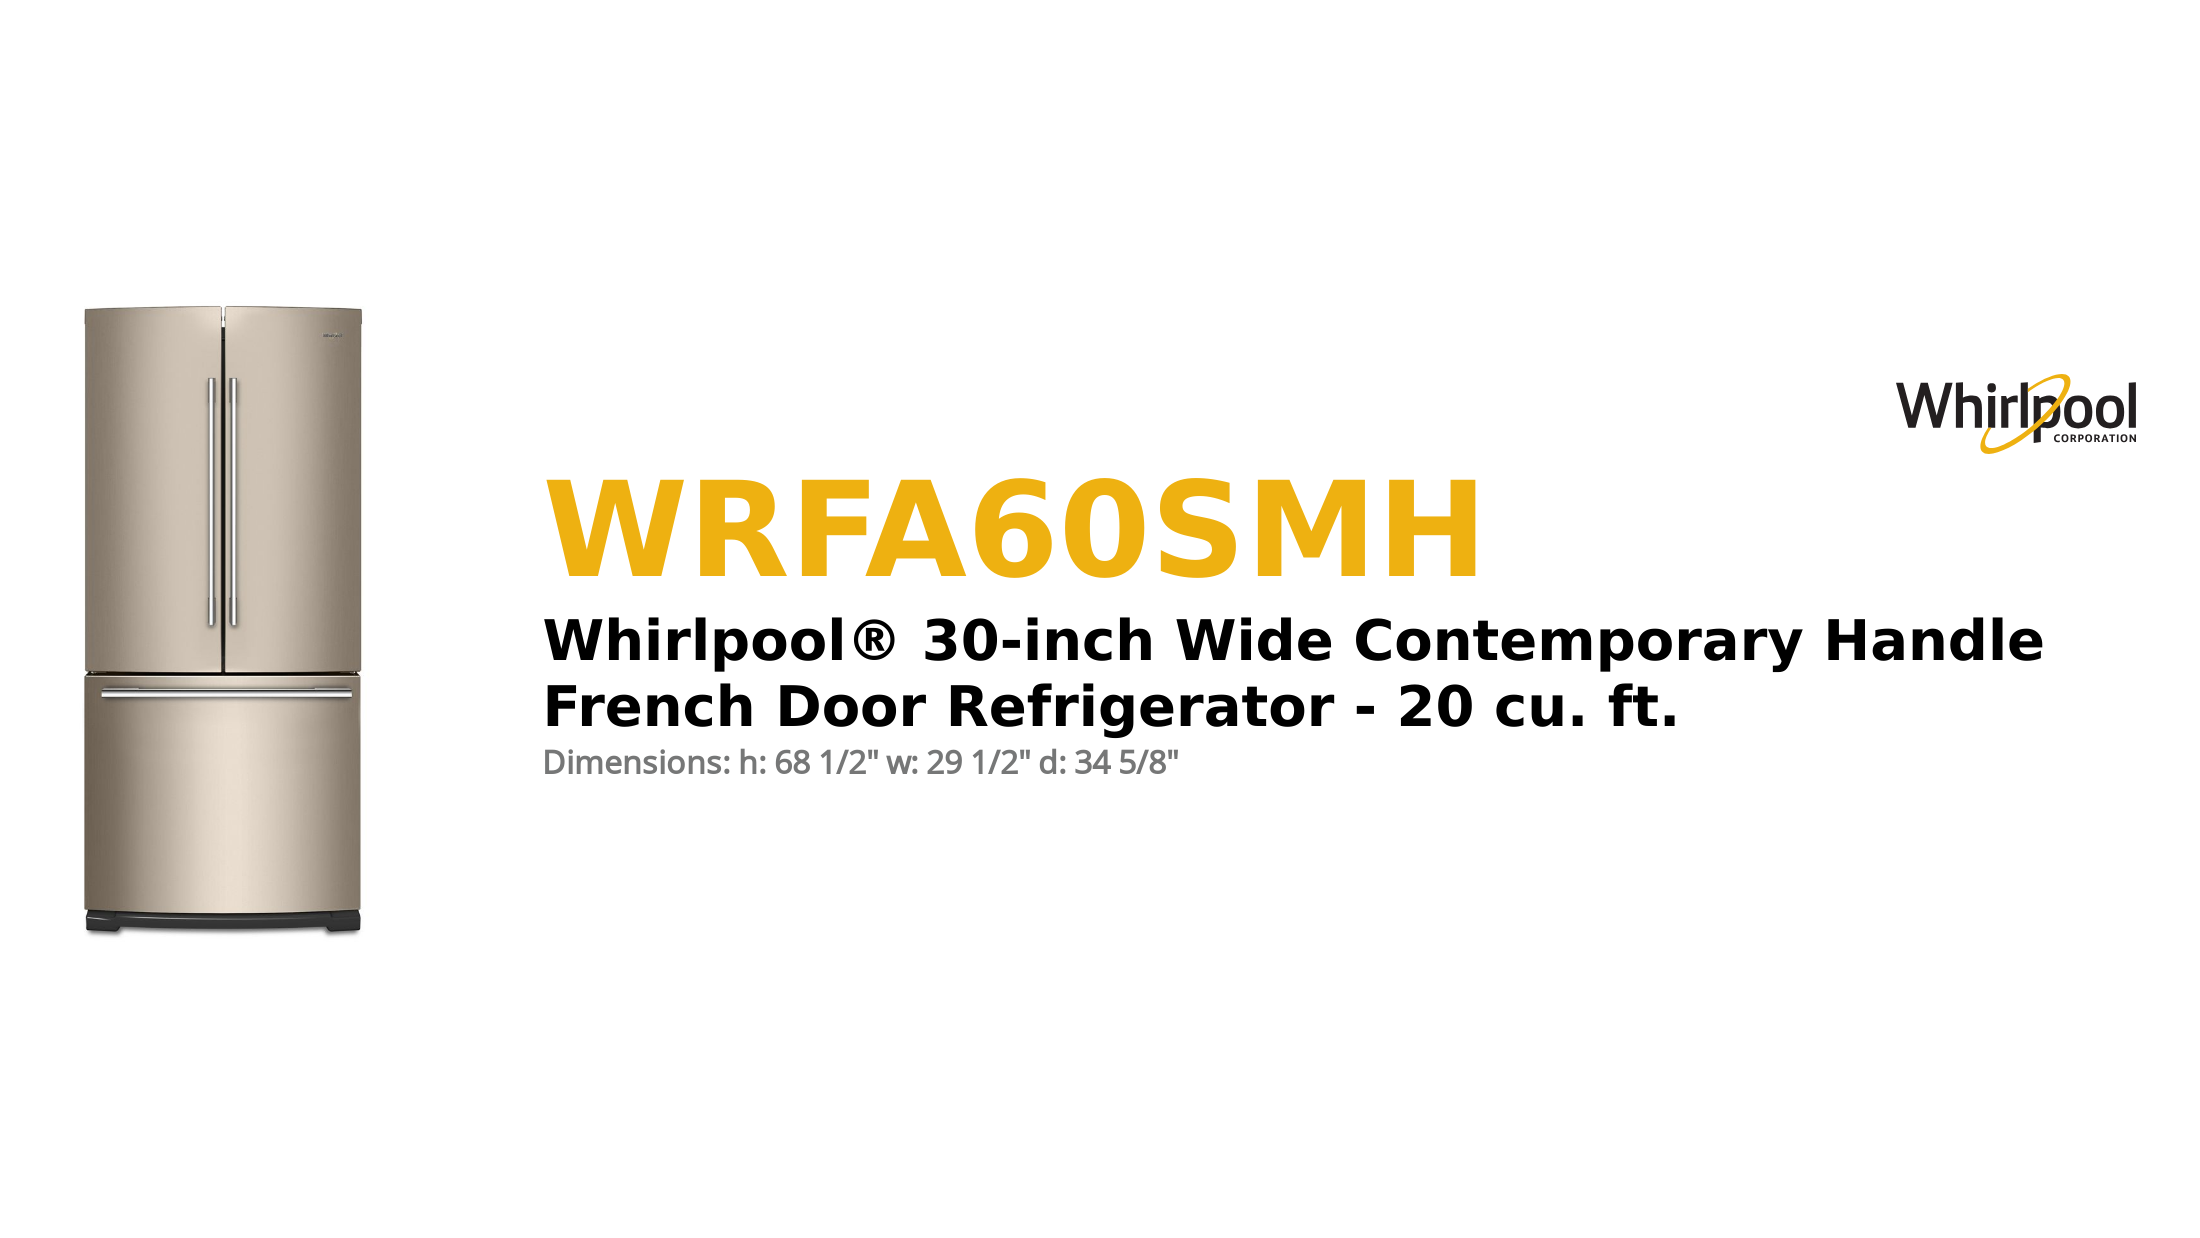 Whirlpool® 30-inch Wide Contemporary Handle French Door Refrigerator - 20 cu. ft.